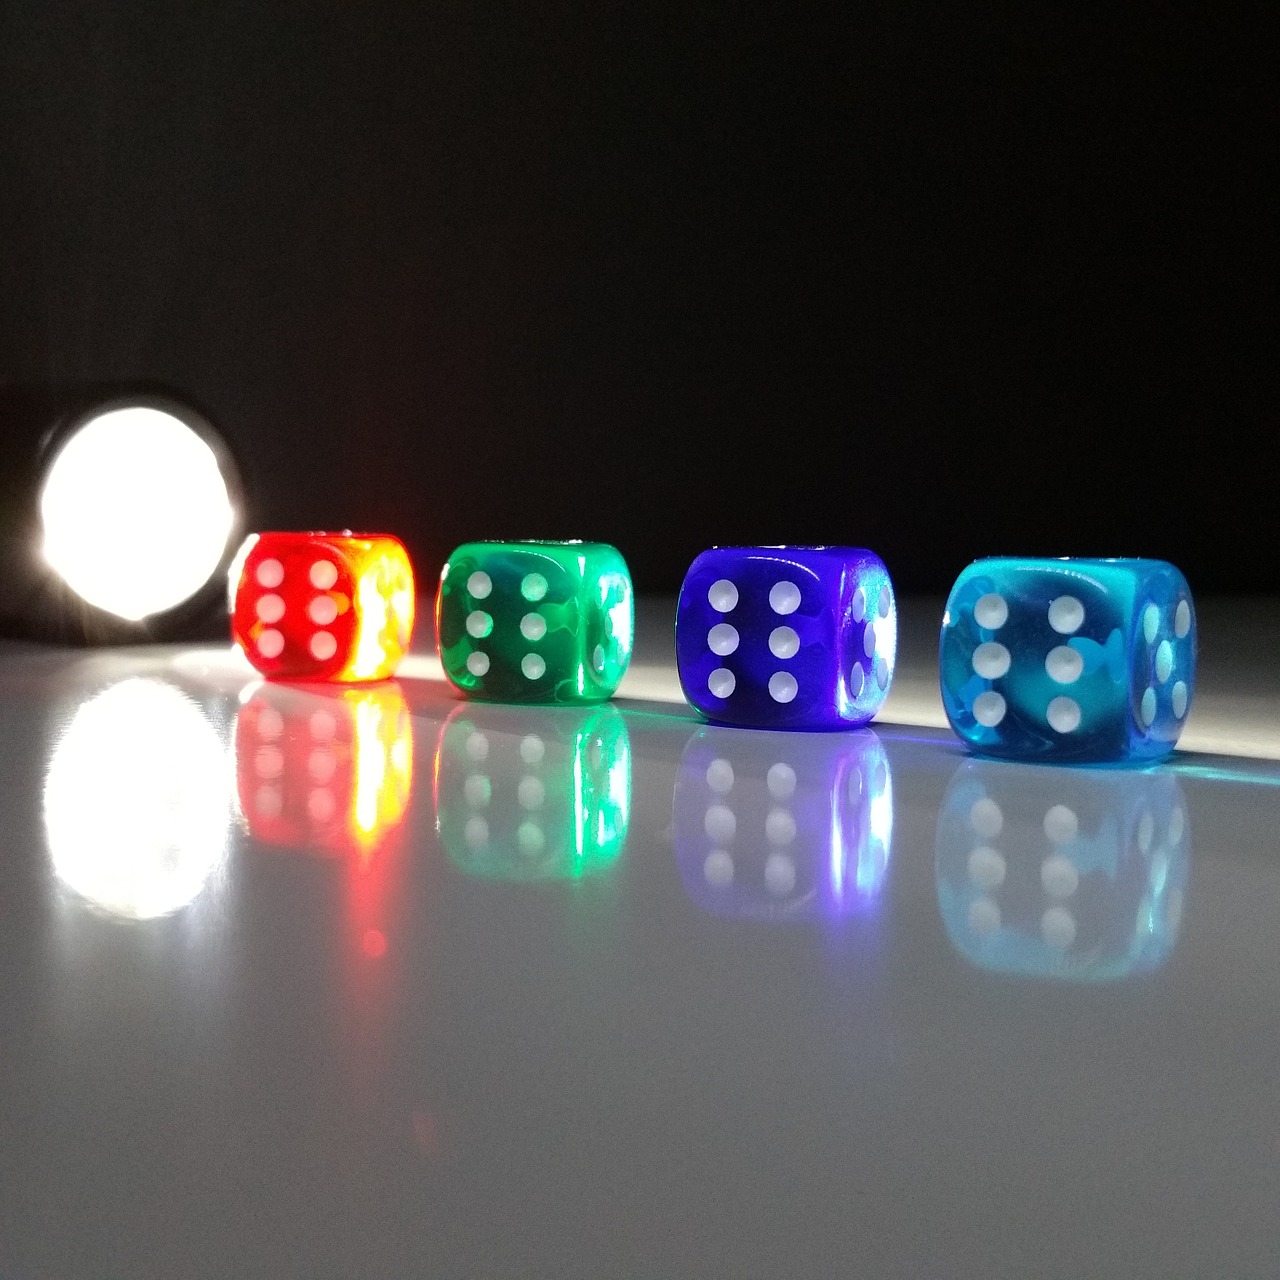 cube luck lucky dice free photo